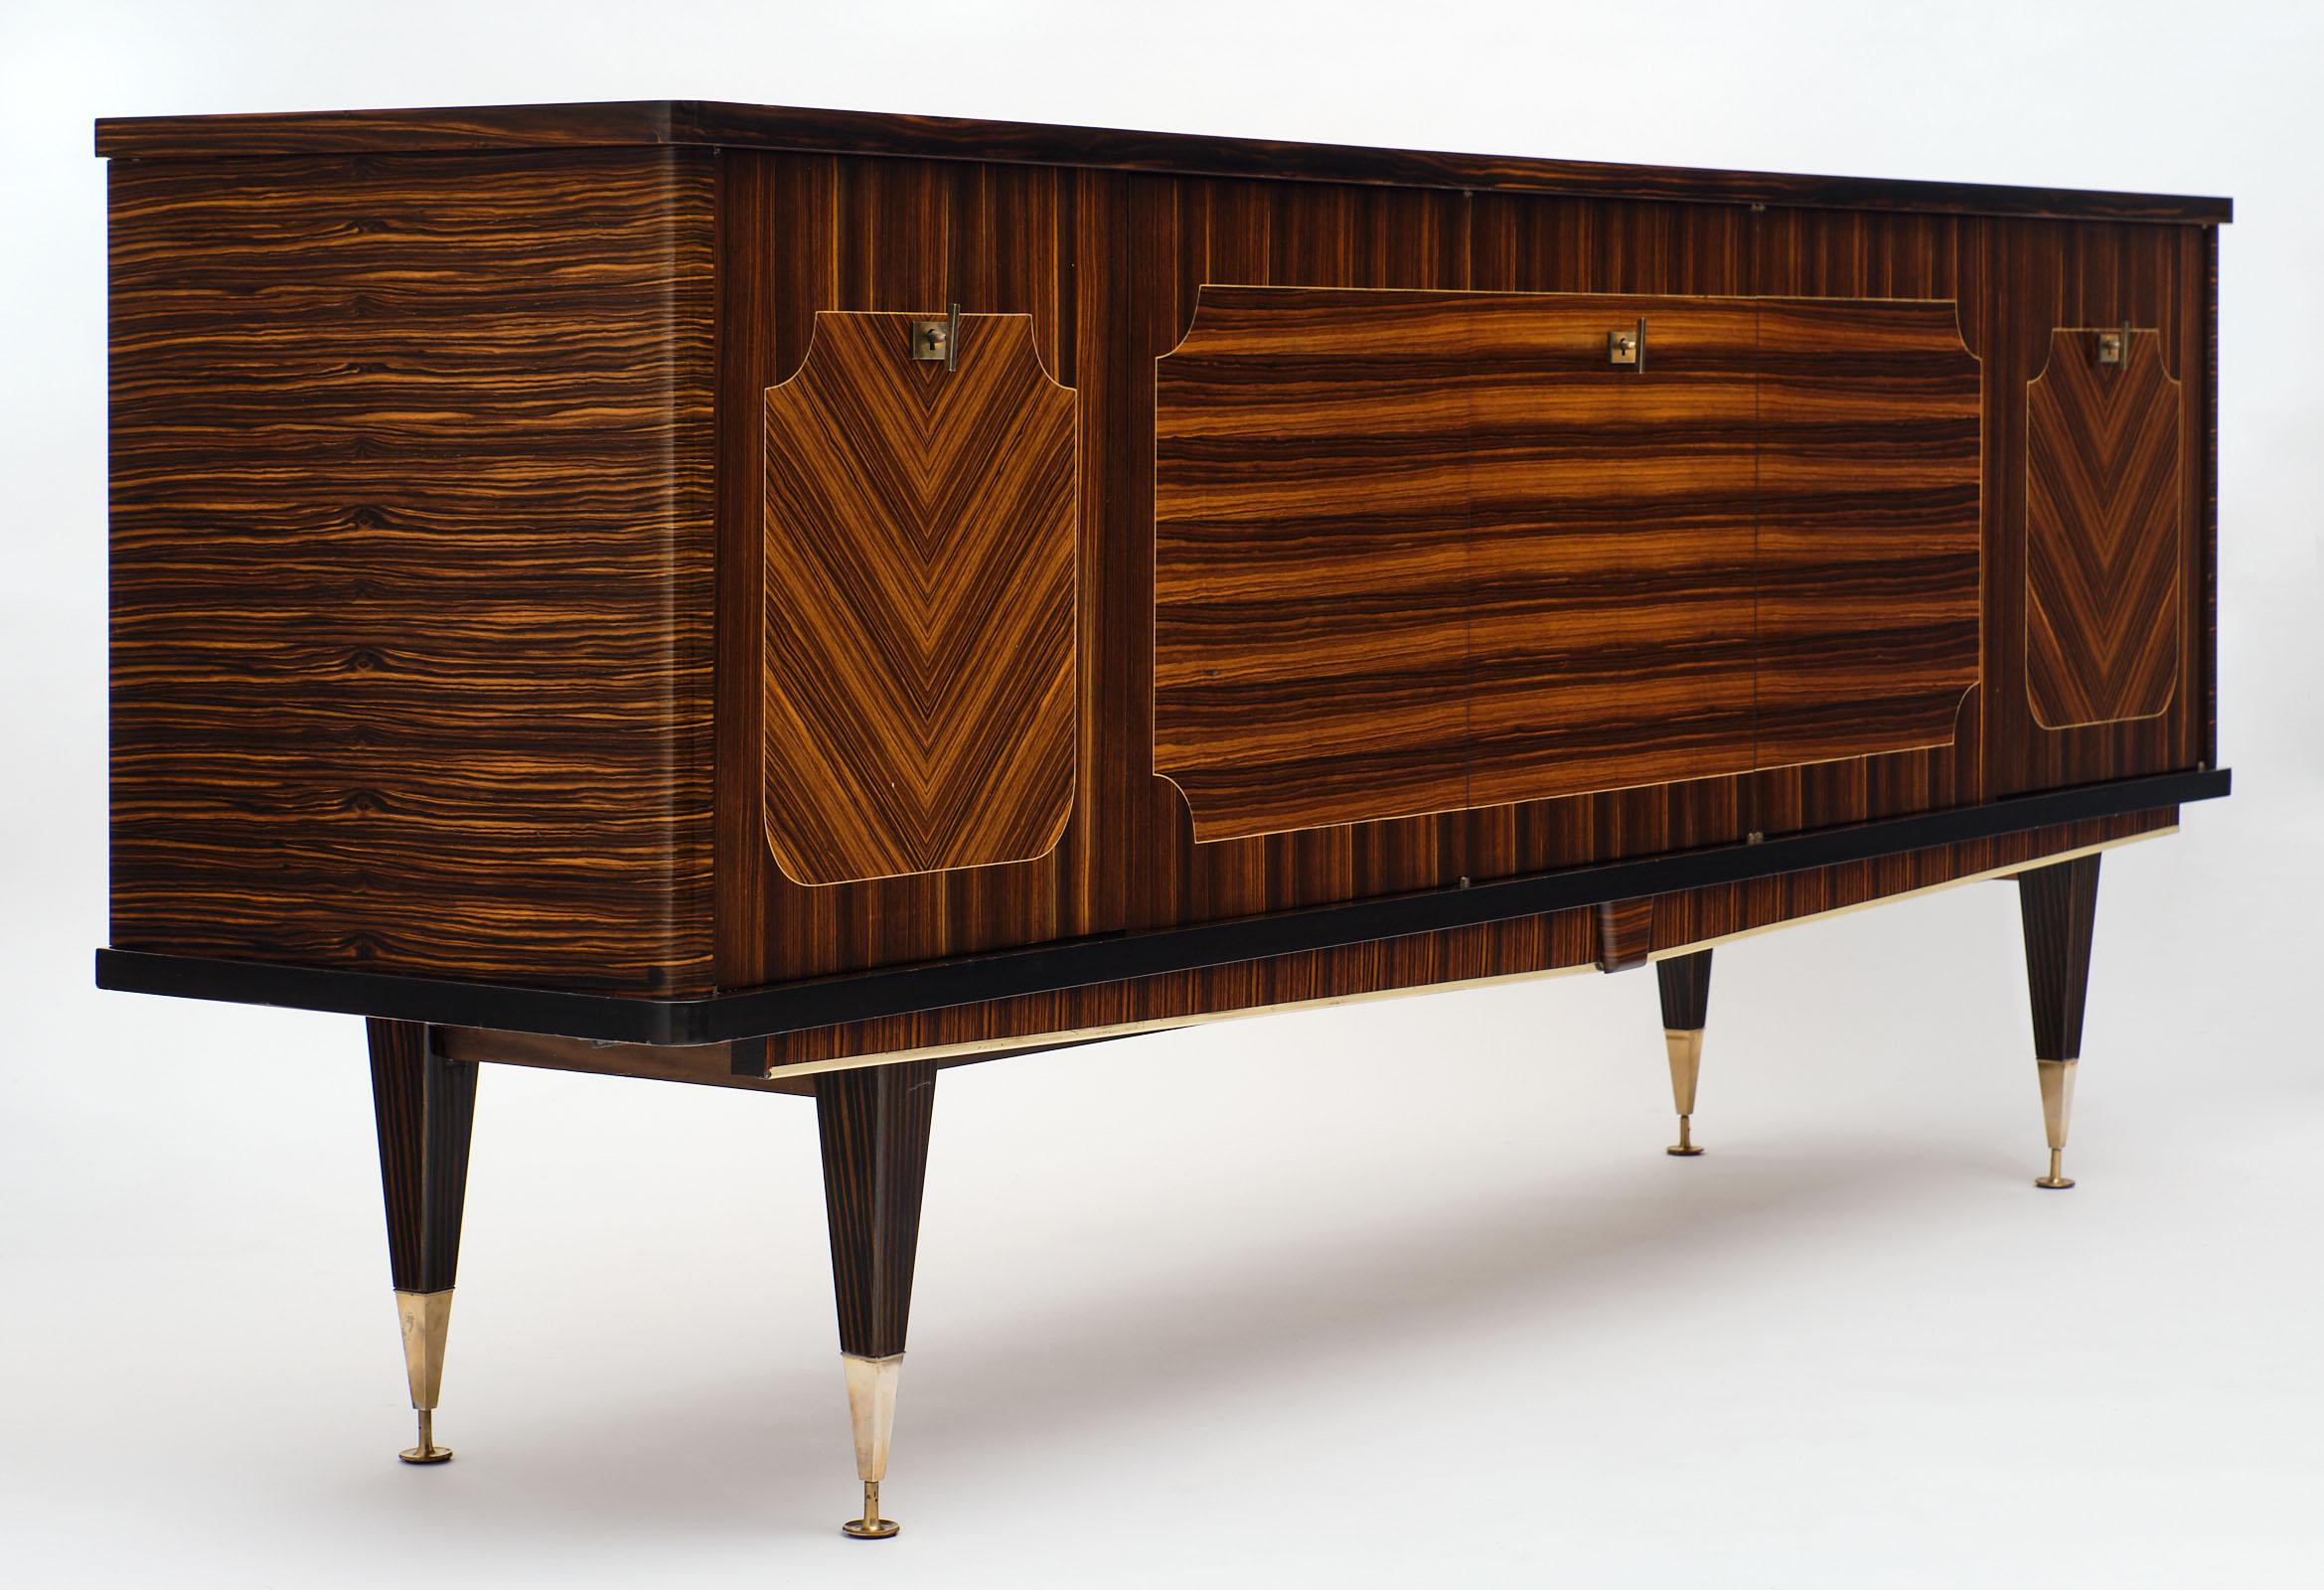 Macassar of ebony French vintage buffet with a very elegant parqueted inlay on the front doors. The doors open to a satin wood interior with a bar compartment and shelves. We love the finely crafted cabinet with four tapered legs finished with gilt